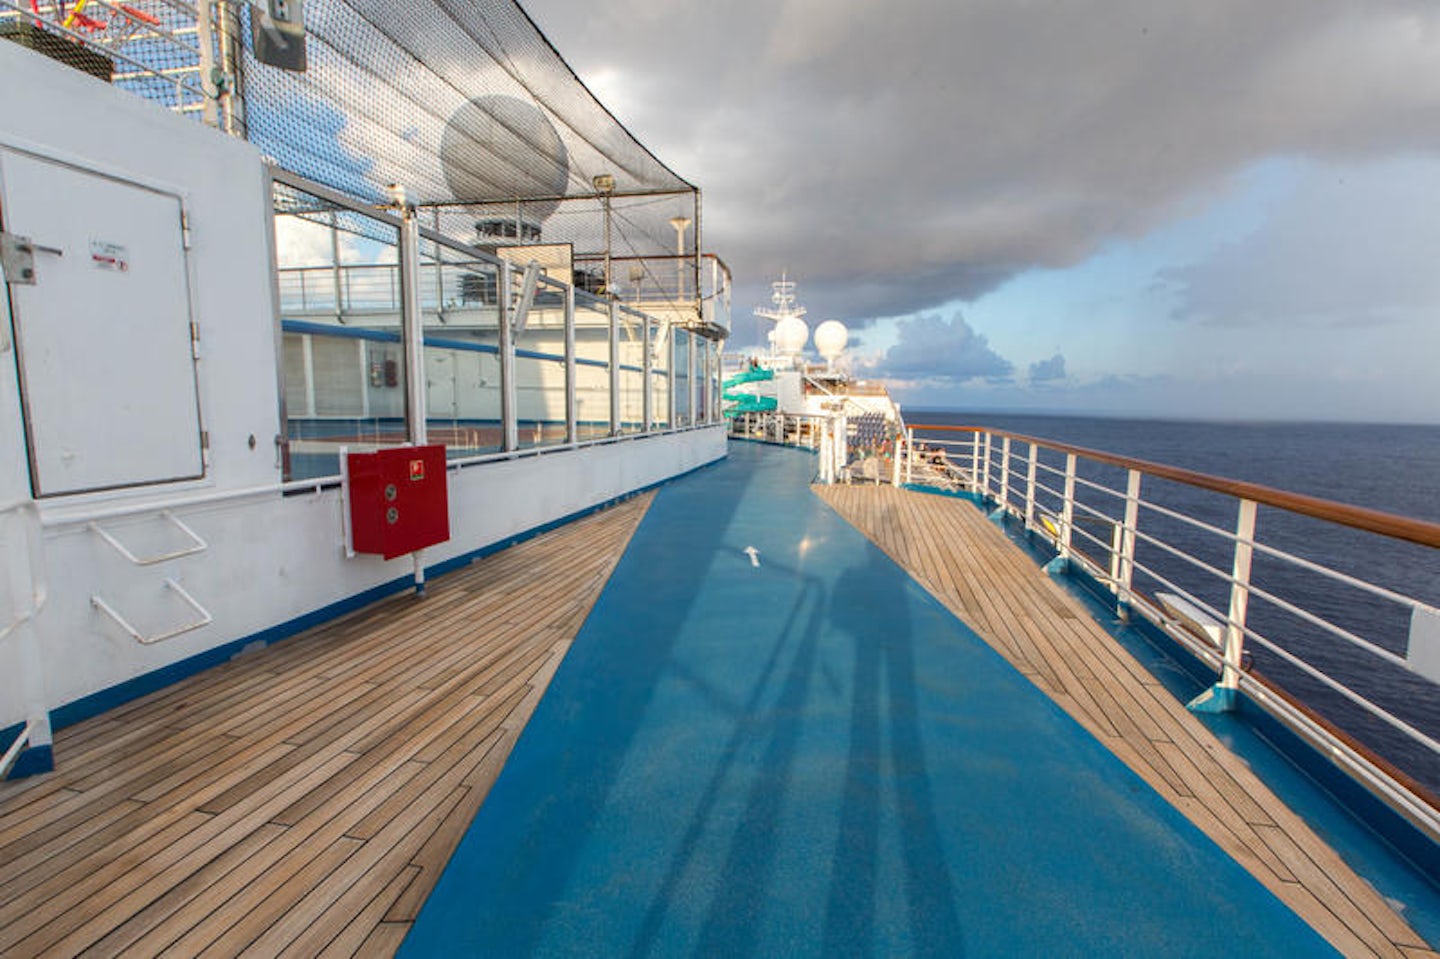 Outdoor Jogging Track on Carnival Freedom